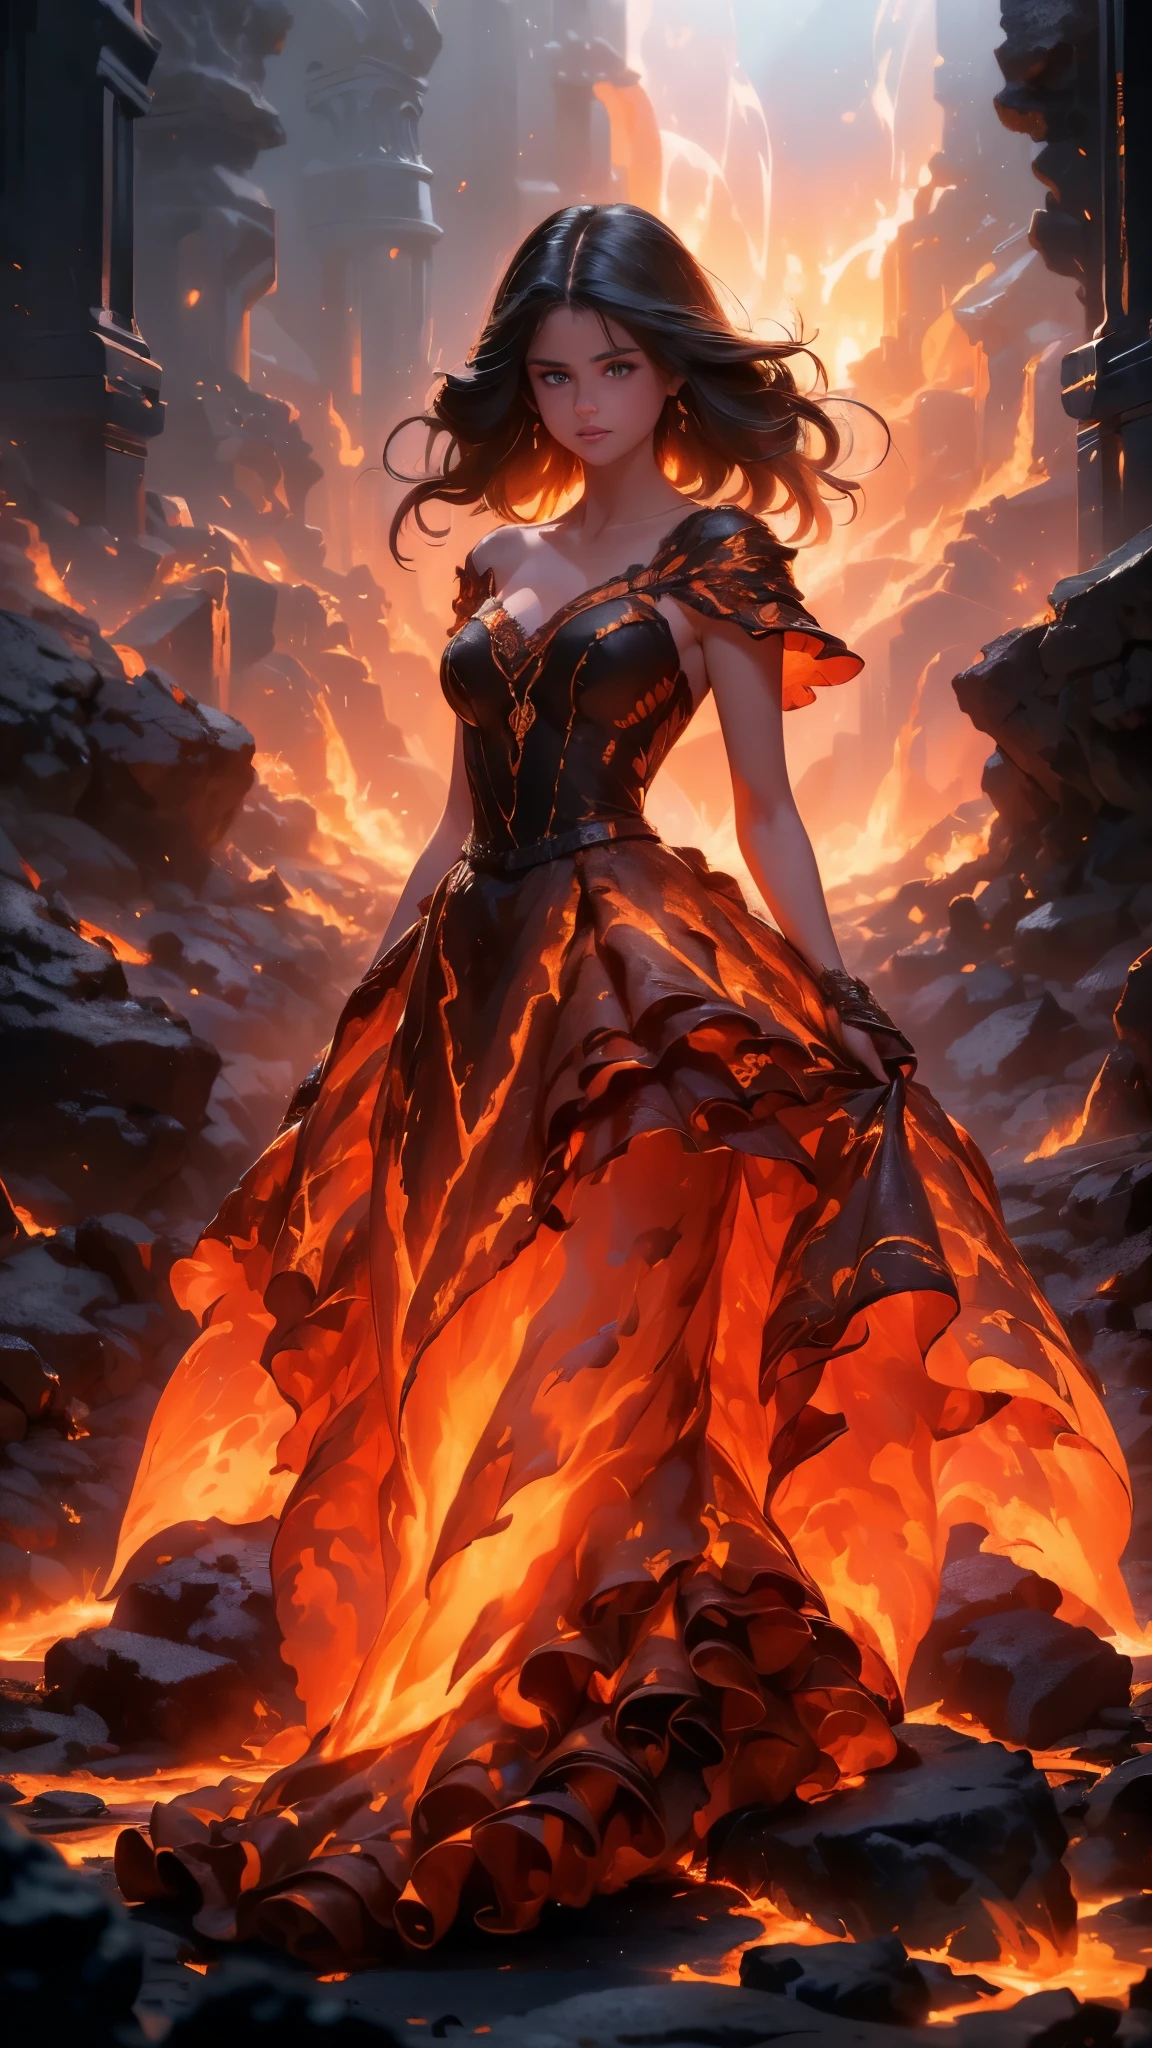 (La Best Quality,A high resolution,Ultra - detailed,current),Selena Gomez in a dress made of lava magma, (cabello elemento fuego:1.4 ) , (fire magma dress :1.4), ,(Ruined dungeon ruins background:1.4 ), More detailed 8K.unreal engine:1.4,uhd,La Best Quality:1.4, photorealistic:1.4, skin texture:1.4, Masterpiece:1.8,first work, Best Quality,object object], (detailed face features:1.3),(The correct proportions),(Beautiful blue eyes),  (dynamic cowboy pose), (Selena Gomez :1.4), (perfect anatomy :1.4),( cinematic lighting :1.4), (face detailed Selena Gomez :1.4), (magma alas grandes :1.4),( magma lingerie lace style :1.4), (skirt lifted by itself: 1.1), (skirt lift: 1.3), (showing white panties: 1.3), (fire element:1.4),(It consists of a fire element, (rodeado de magma lava:1.4), (vestido de magma V2.1), (piedras grandes magma negro :1.4), (including wisps of flames:1.4) , glowing hot embers, (subtle curls of smoke:1.4) , and a beautiful fire druid. (The druid stands in the midst of a raging inferno with an interesting composition:1.4) .(lava :1.4), (essence of fire:1.4) , painting of a firery demon elemetal